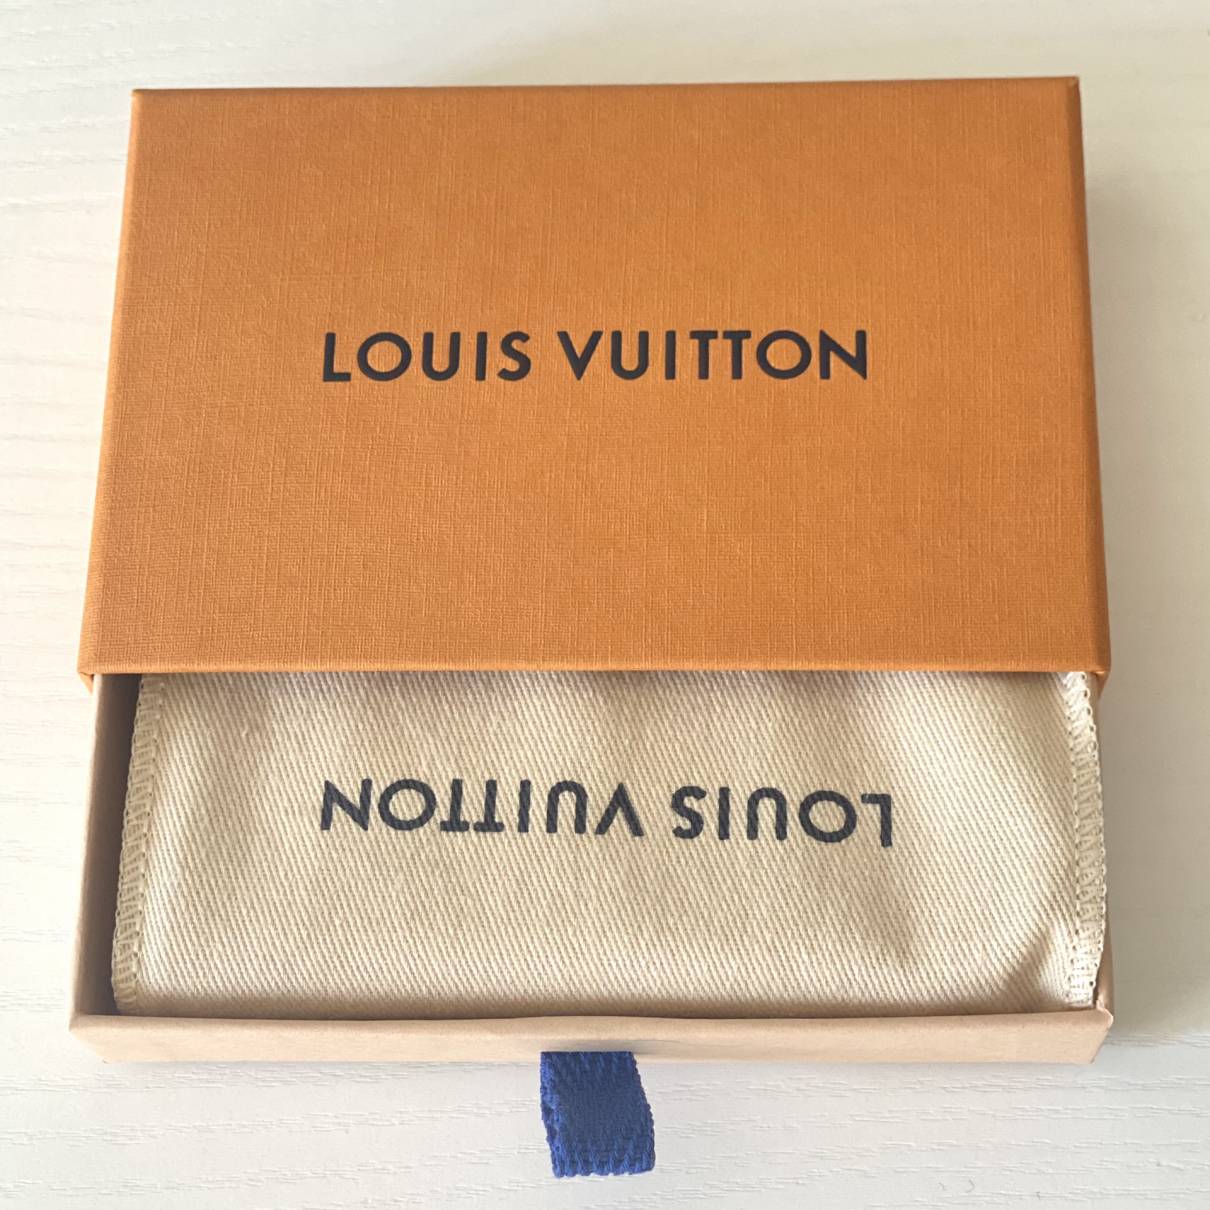 Pocket organizer leather small bag Louis Vuitton Blue in Leather - 25075100